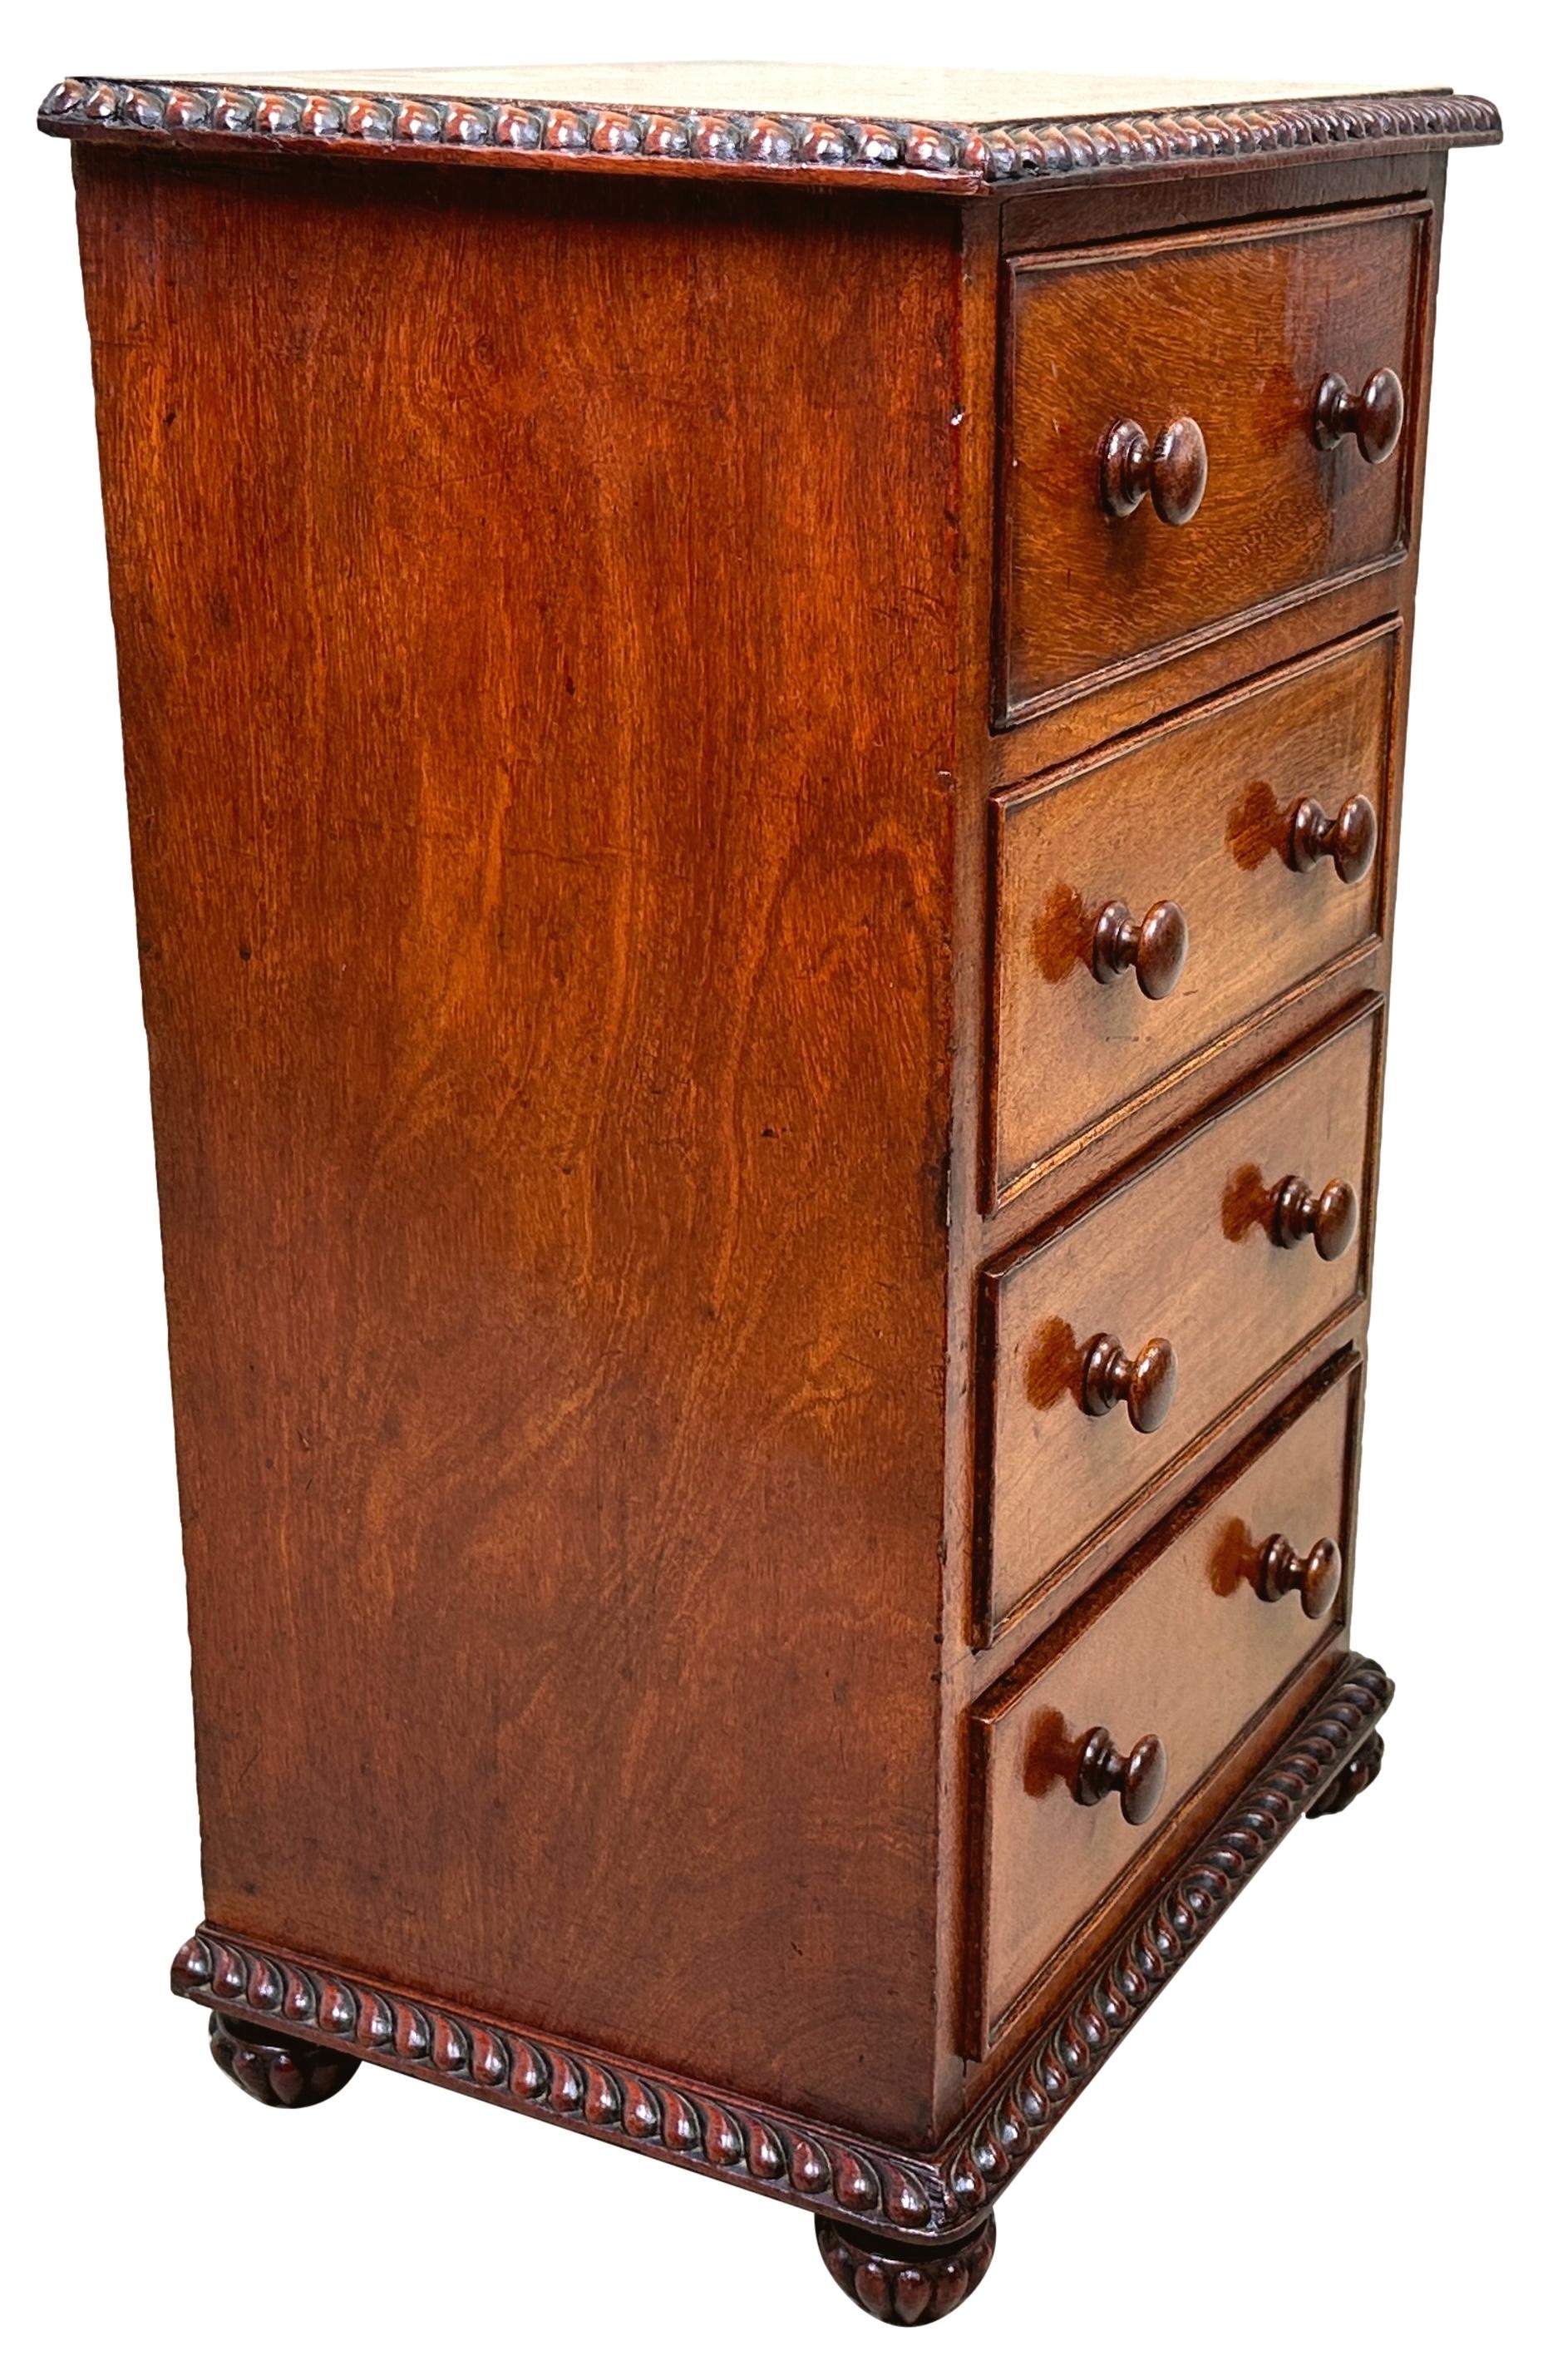 An Attractive And Very Good Quality Anglo-Indian, 19th Century, Padouk Wood Childs Chest, Having Well Figured Rectangular Top With Gadrooned Carving To Edge, Over Four Drawers, Retaining Original Turned Wooden Knobs, Raised On Original Attractive